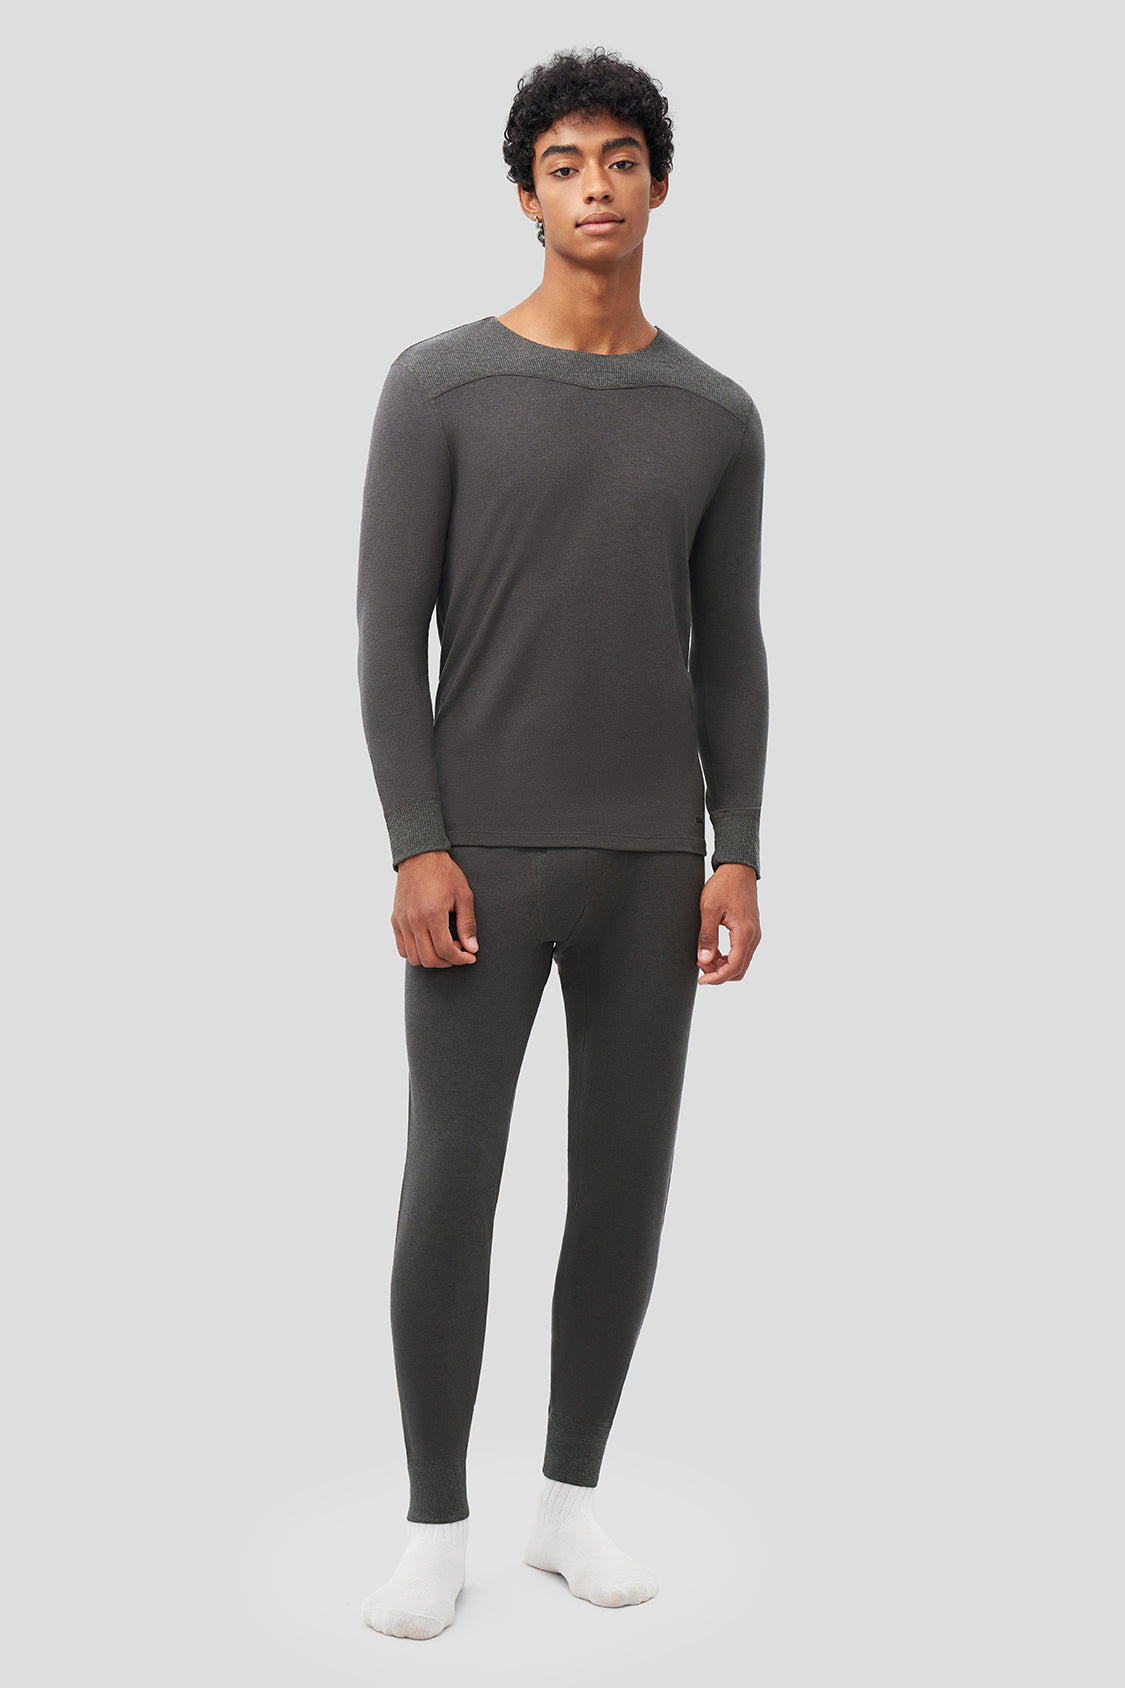  Thermal Underwear For Men Fleece Lined Long Johns Thermals  Top And Bottom Set Base Layer For Cold Weather Grey L